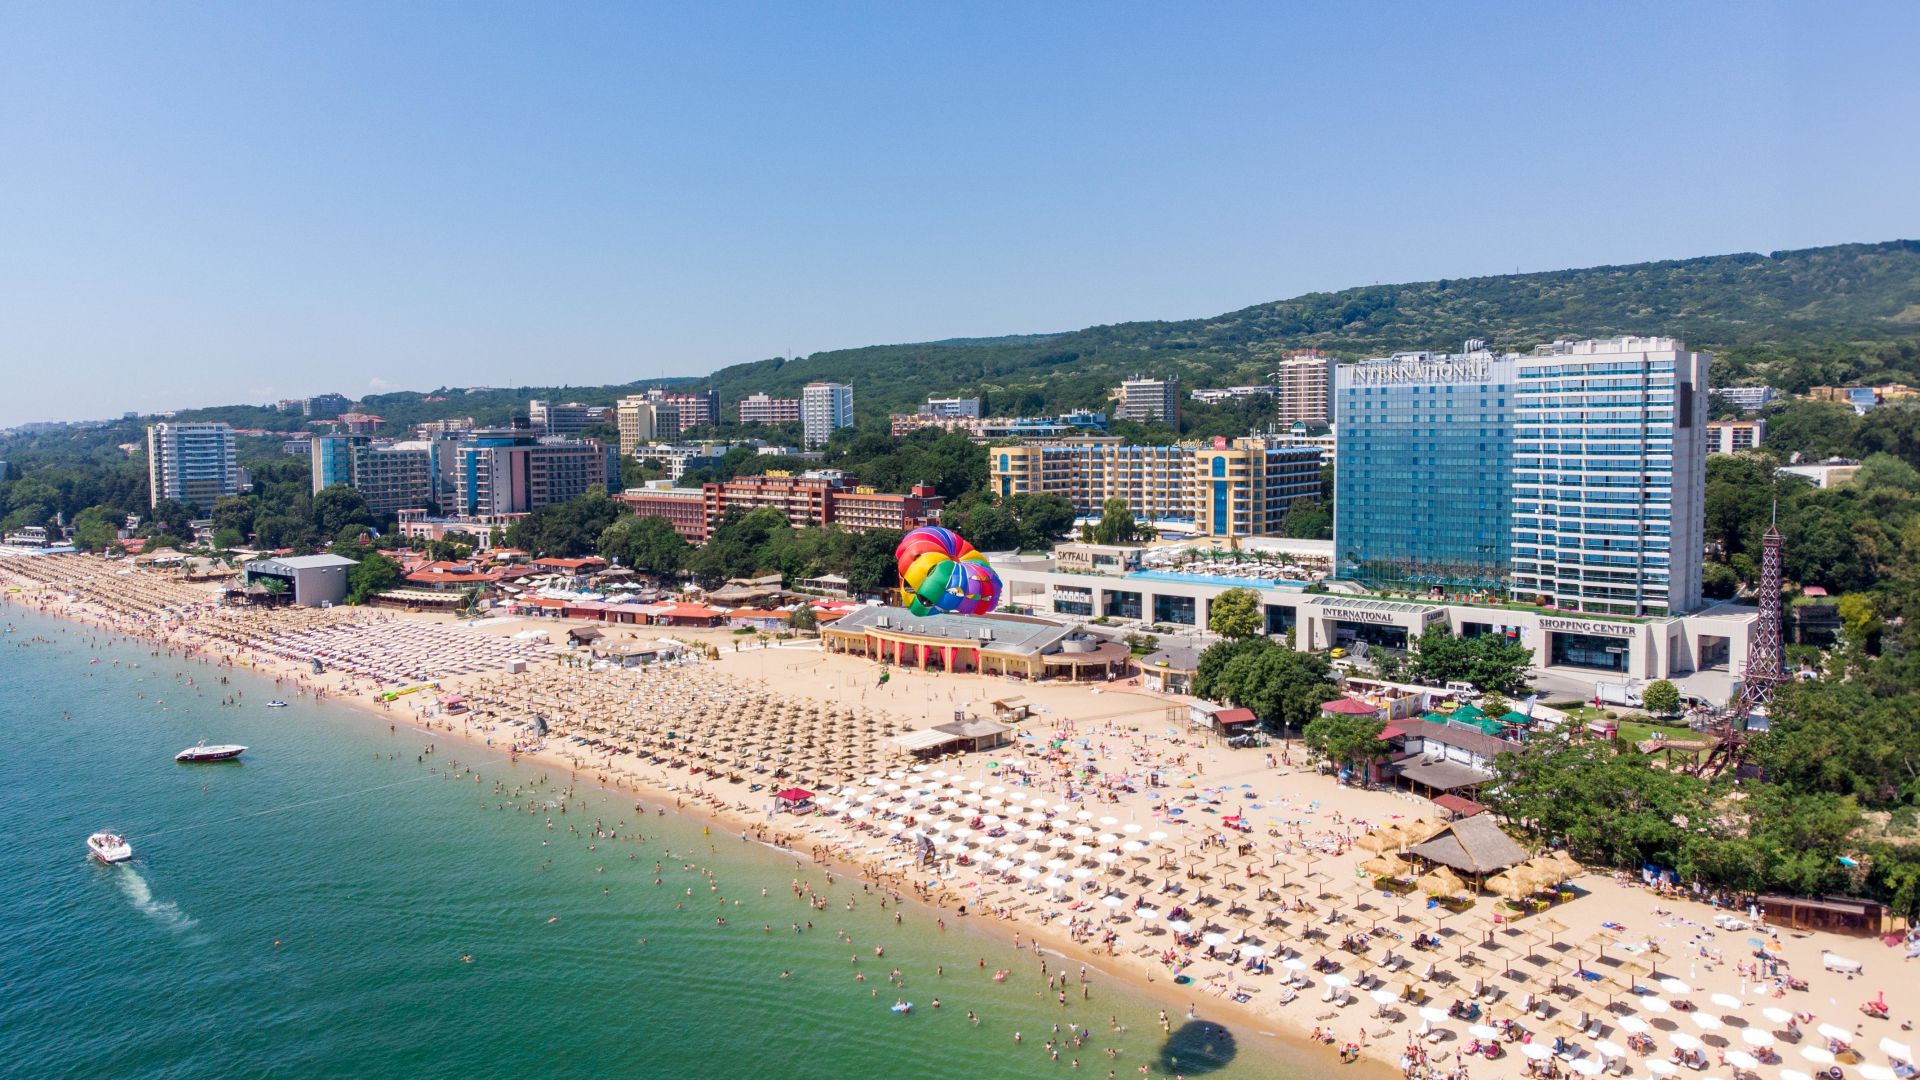 A Beach With Many People And Buildings